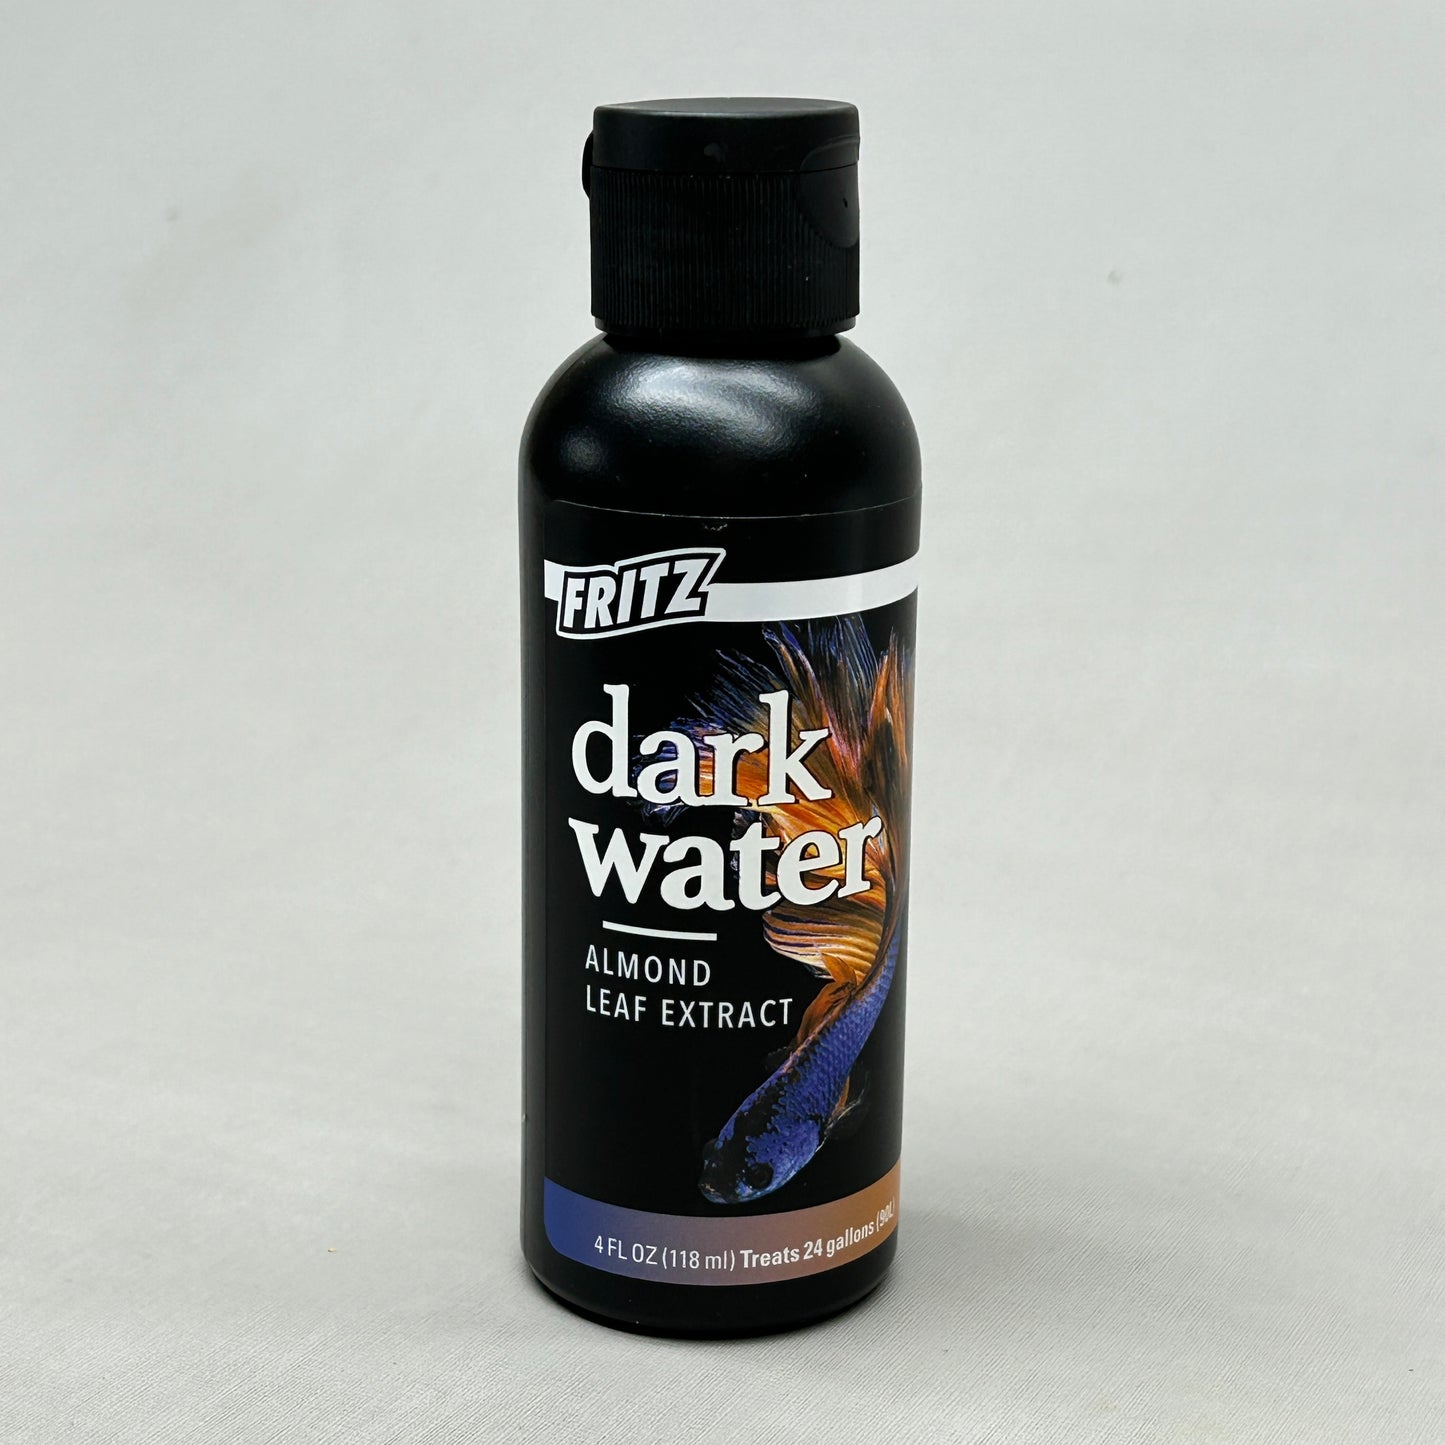 FRITZ Case of 12 Dark Water Almond Leaf Extract for Bettas 4 Oz BB 06/25 (New)